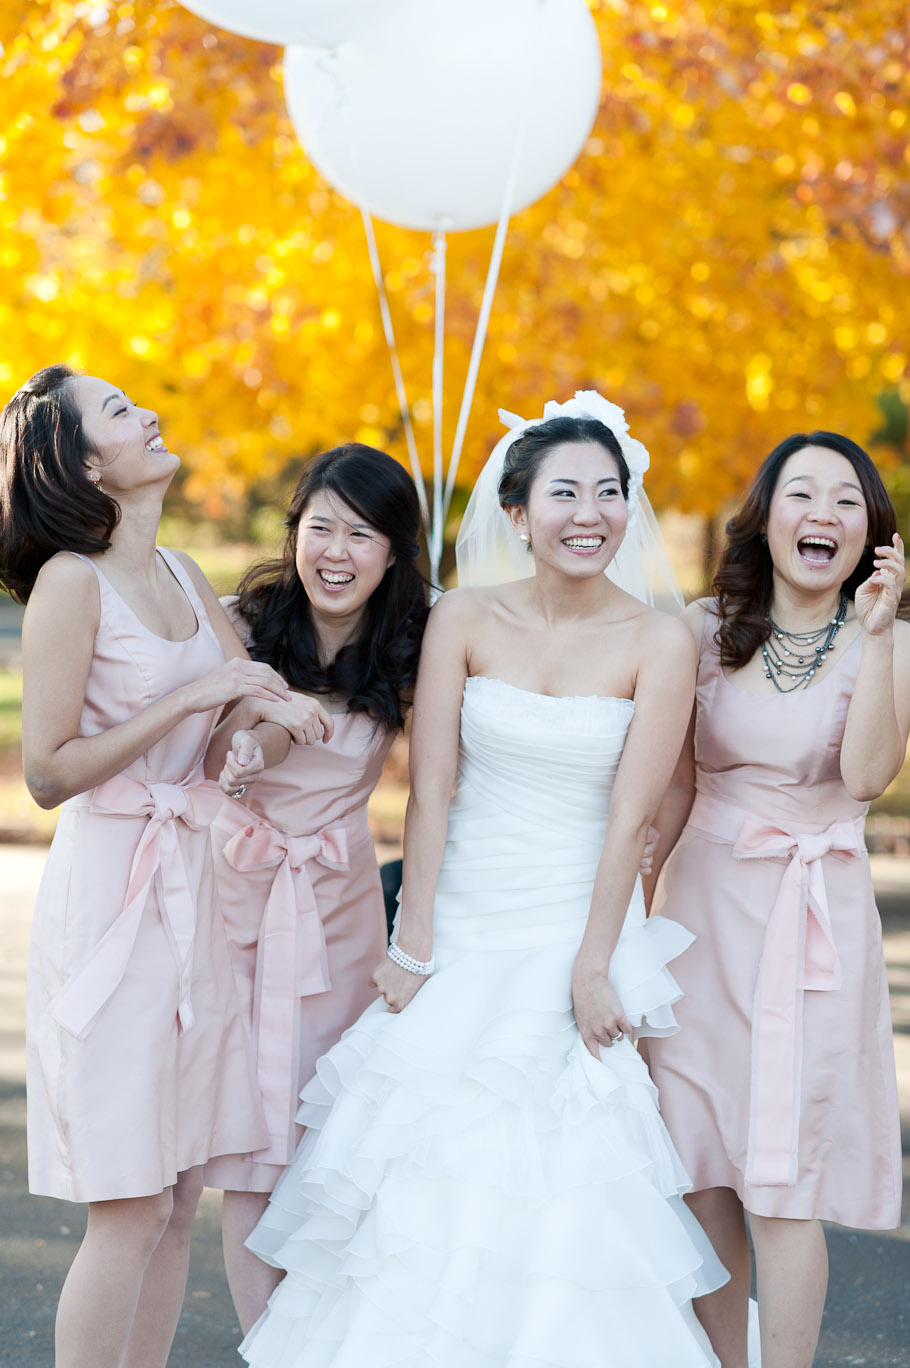 Bride and bridesmaids candidly enjoying themselves